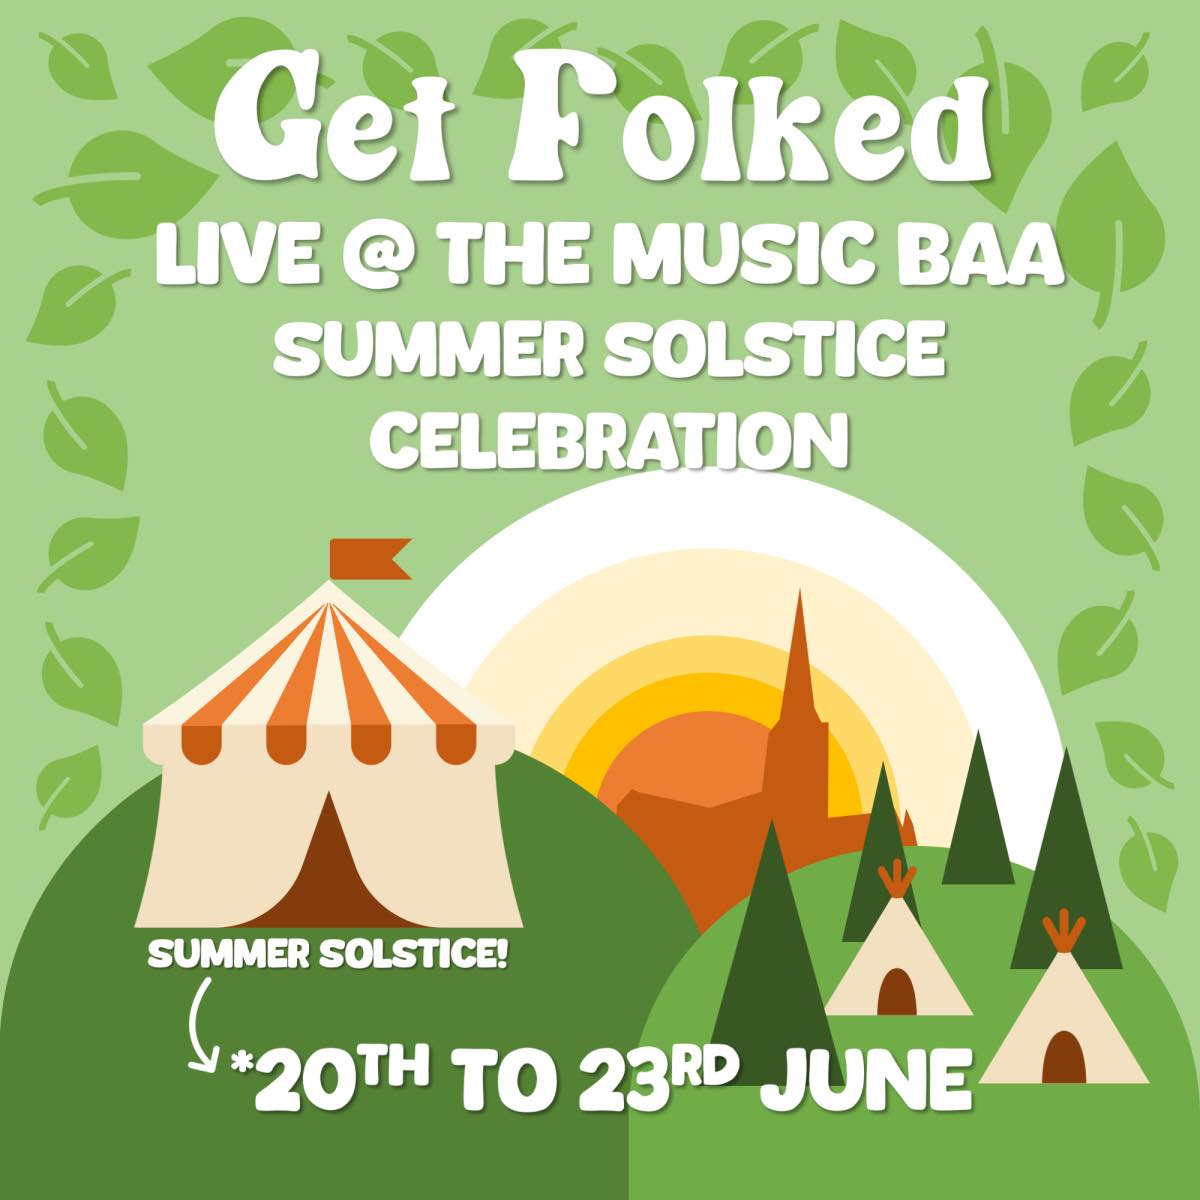 Get Folked at The Music Baa - Summer Solstice Celebration